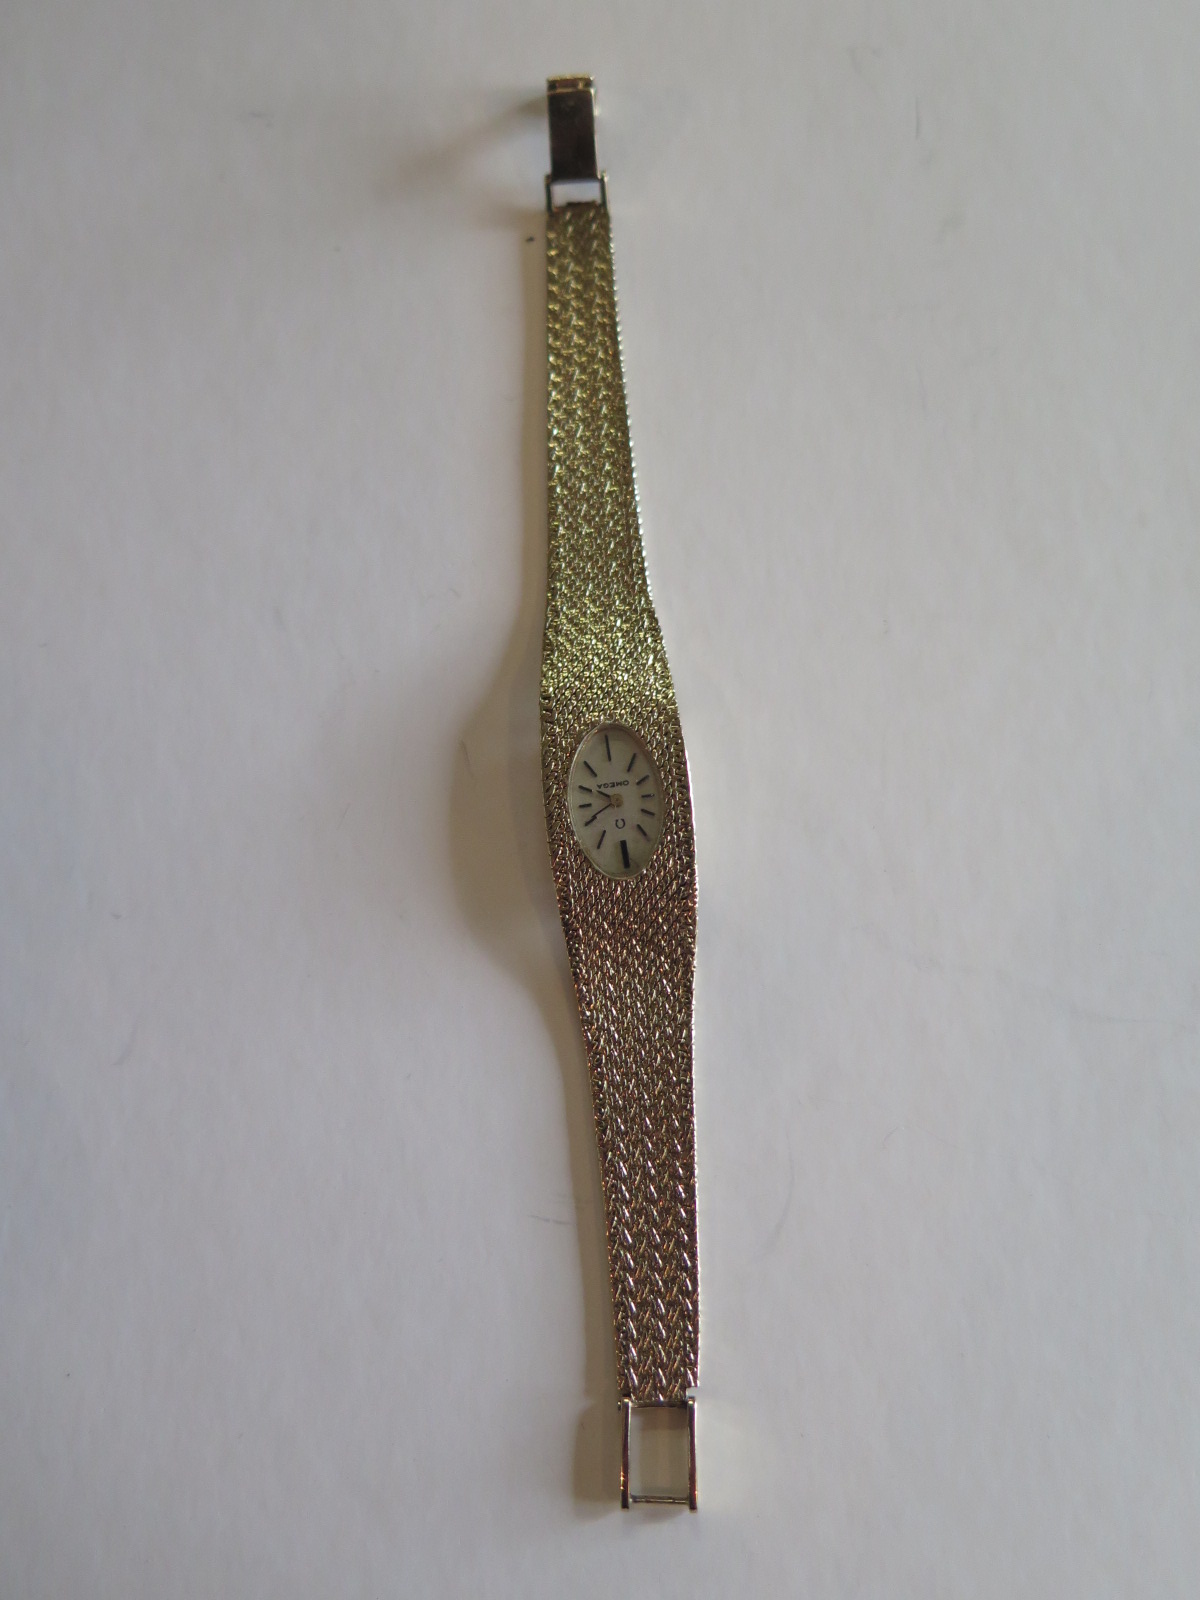 A ladies 9ct gold Omega wrist watch with oval silvered dial - 650 watch movement winding crown loose